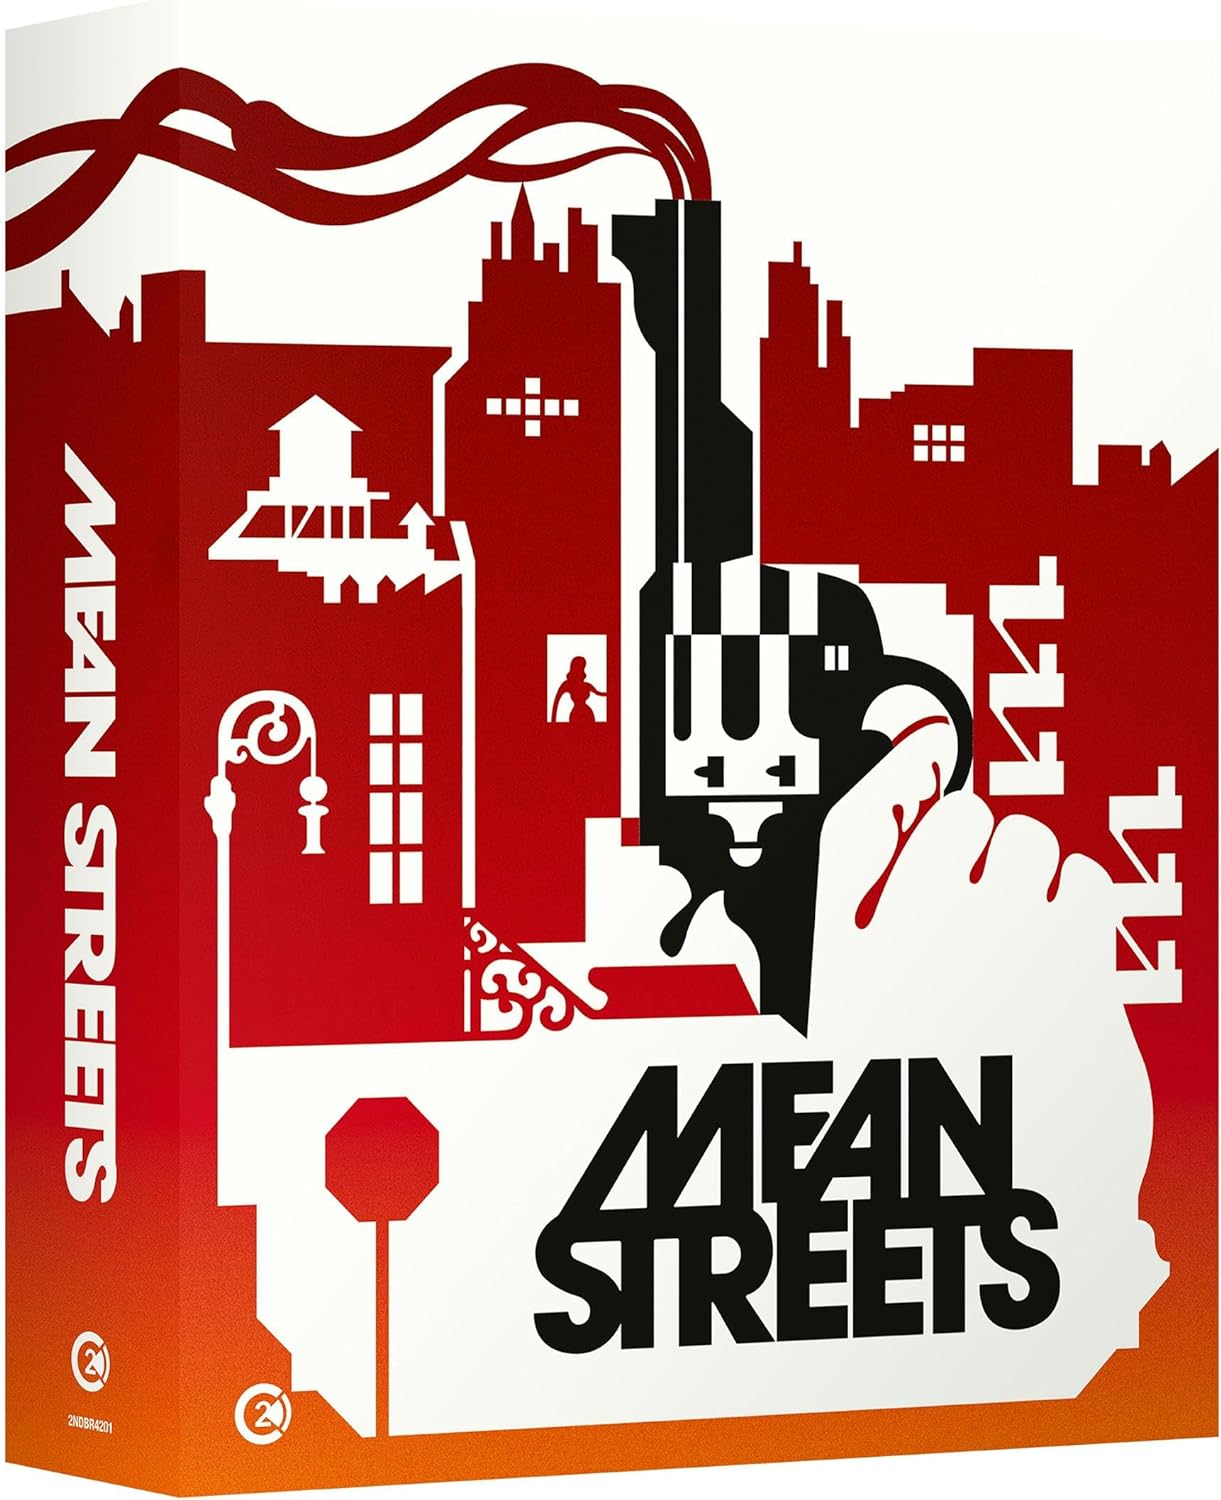 MEAN STREETS (REGION FREE IMPORT - LIMITED EDITION) 4K UHD